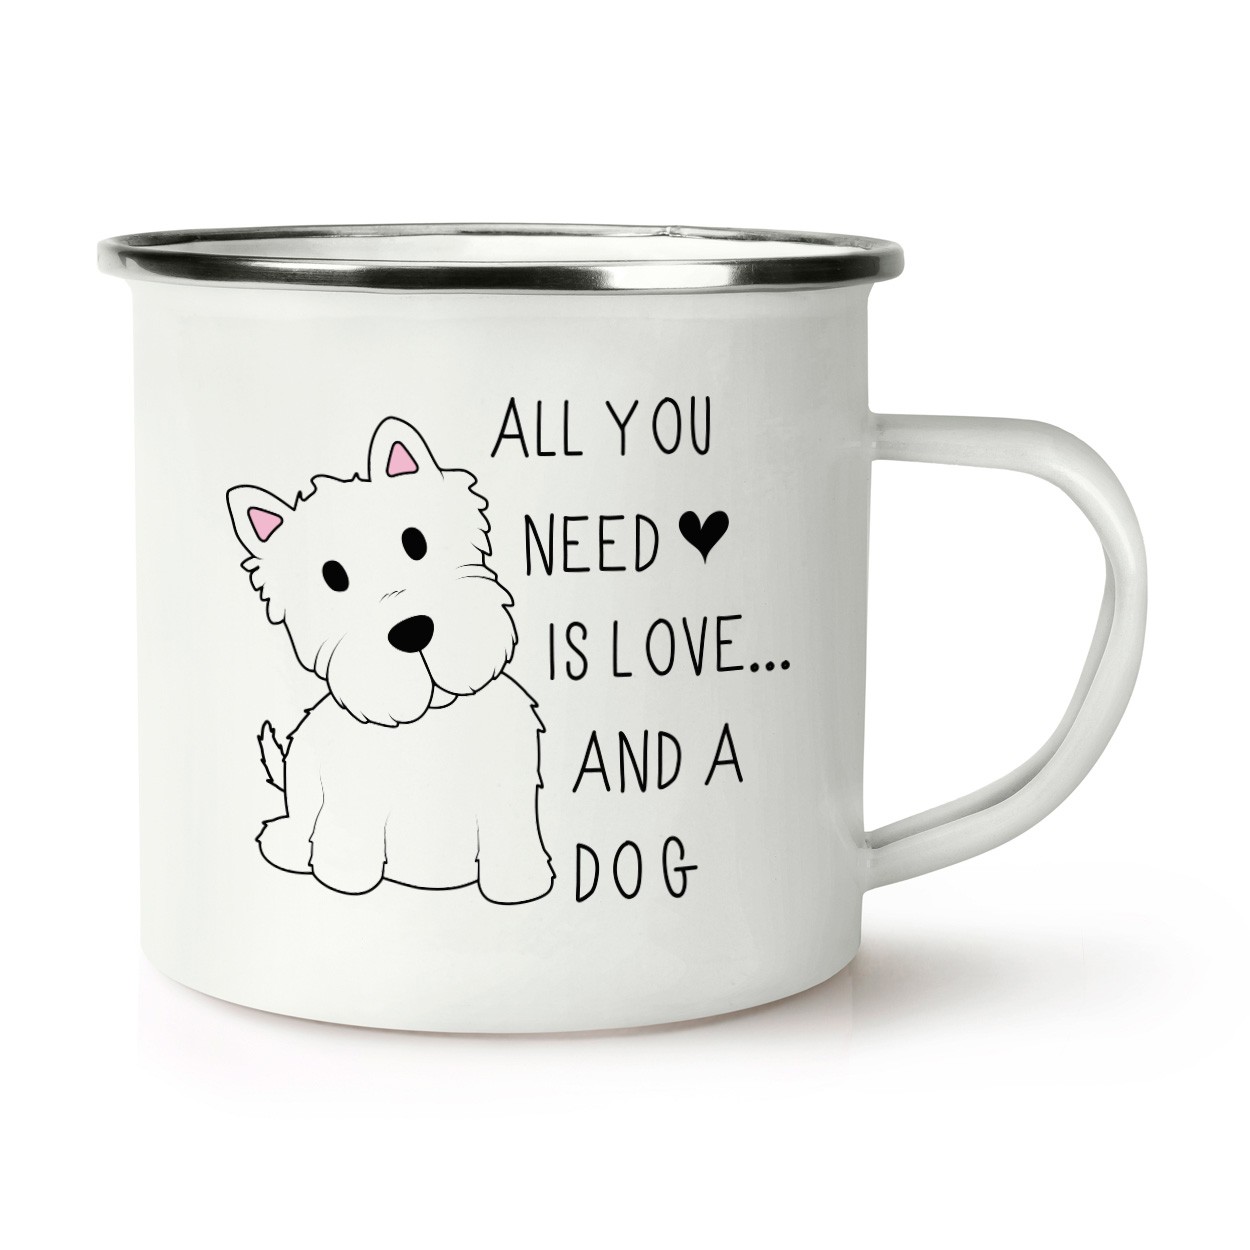 All You Need Is Love And A Dog Retro Enamel Mug Cup